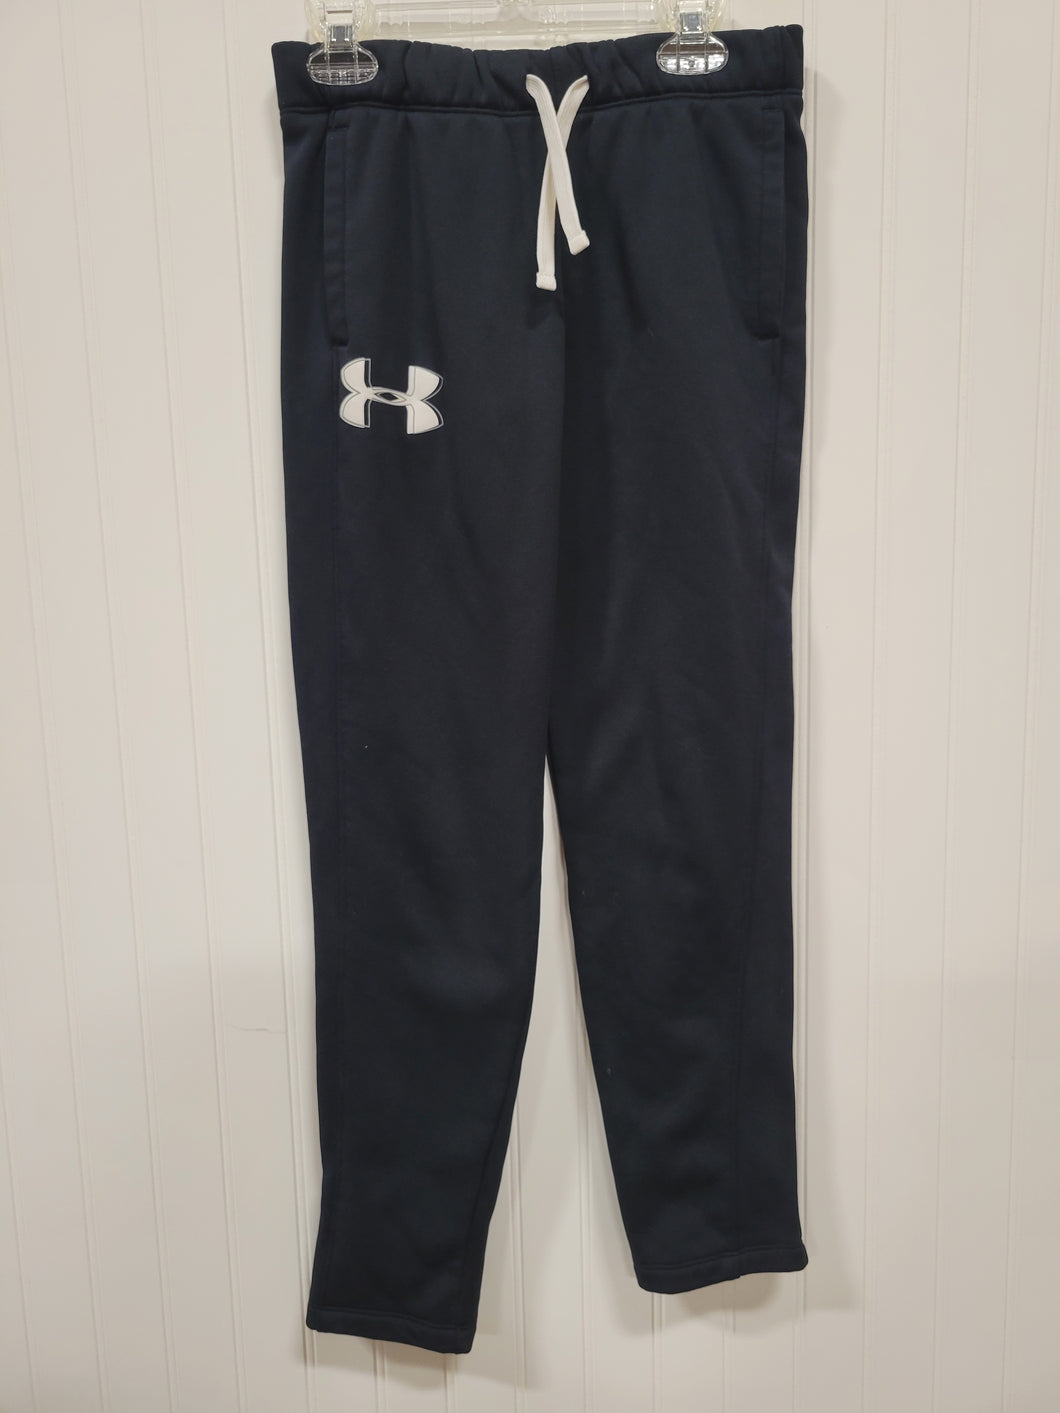 Under Armour Atheltic Pants